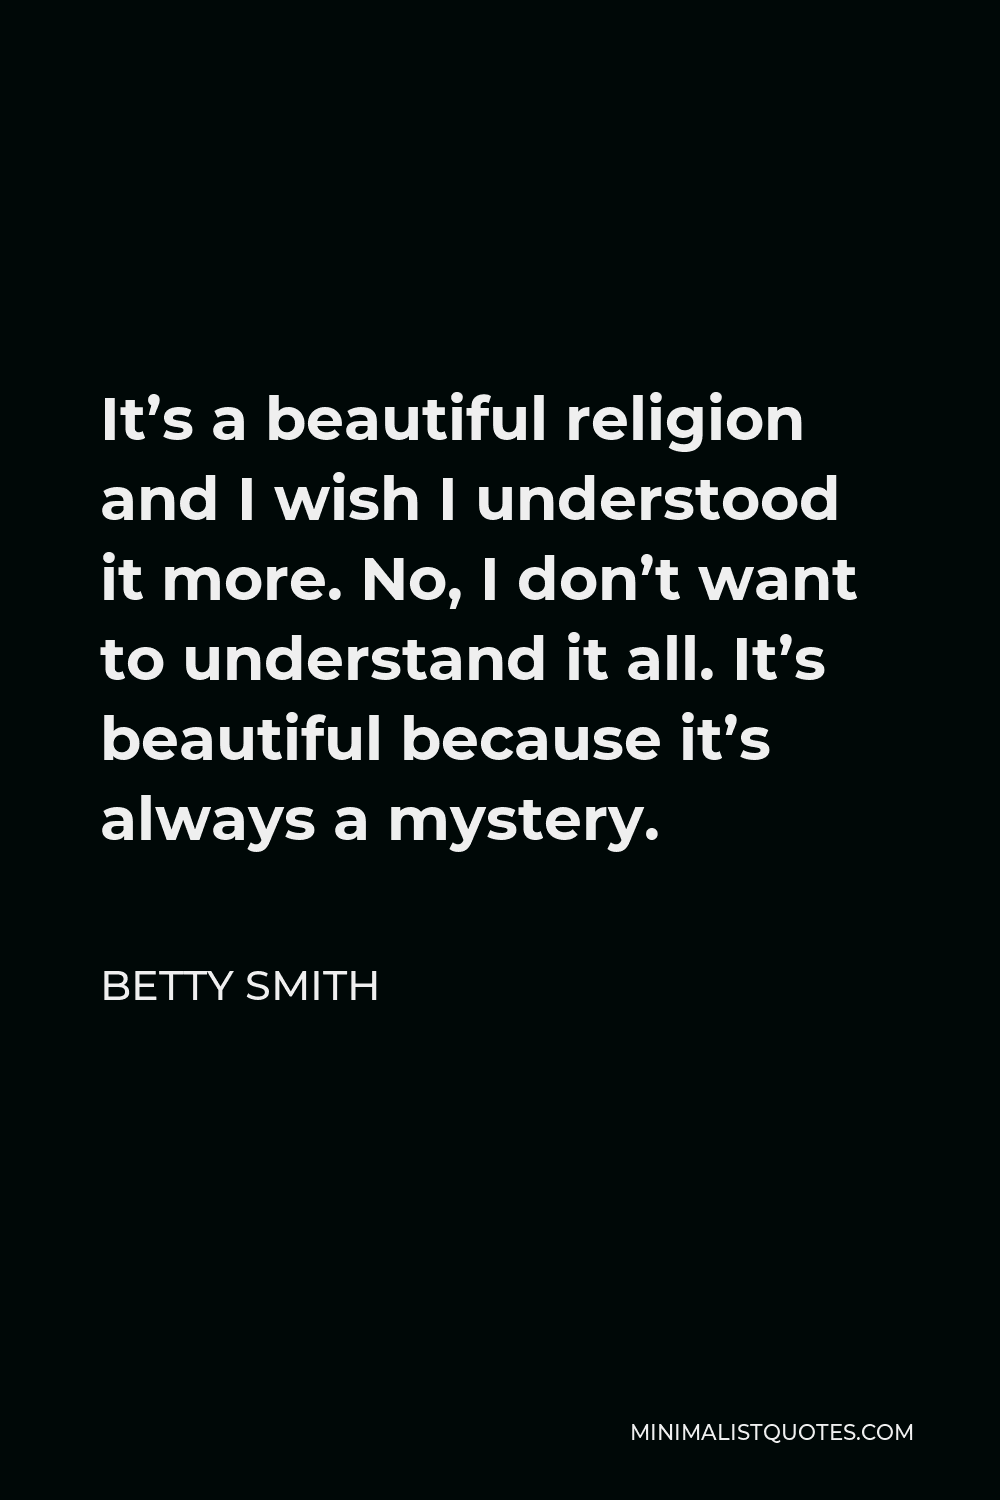 Betty Smith Quote - It’s a beautiful religion and I wish I understood it more. No, I don’t want to understand it all. It’s beautiful because it’s always a mystery.